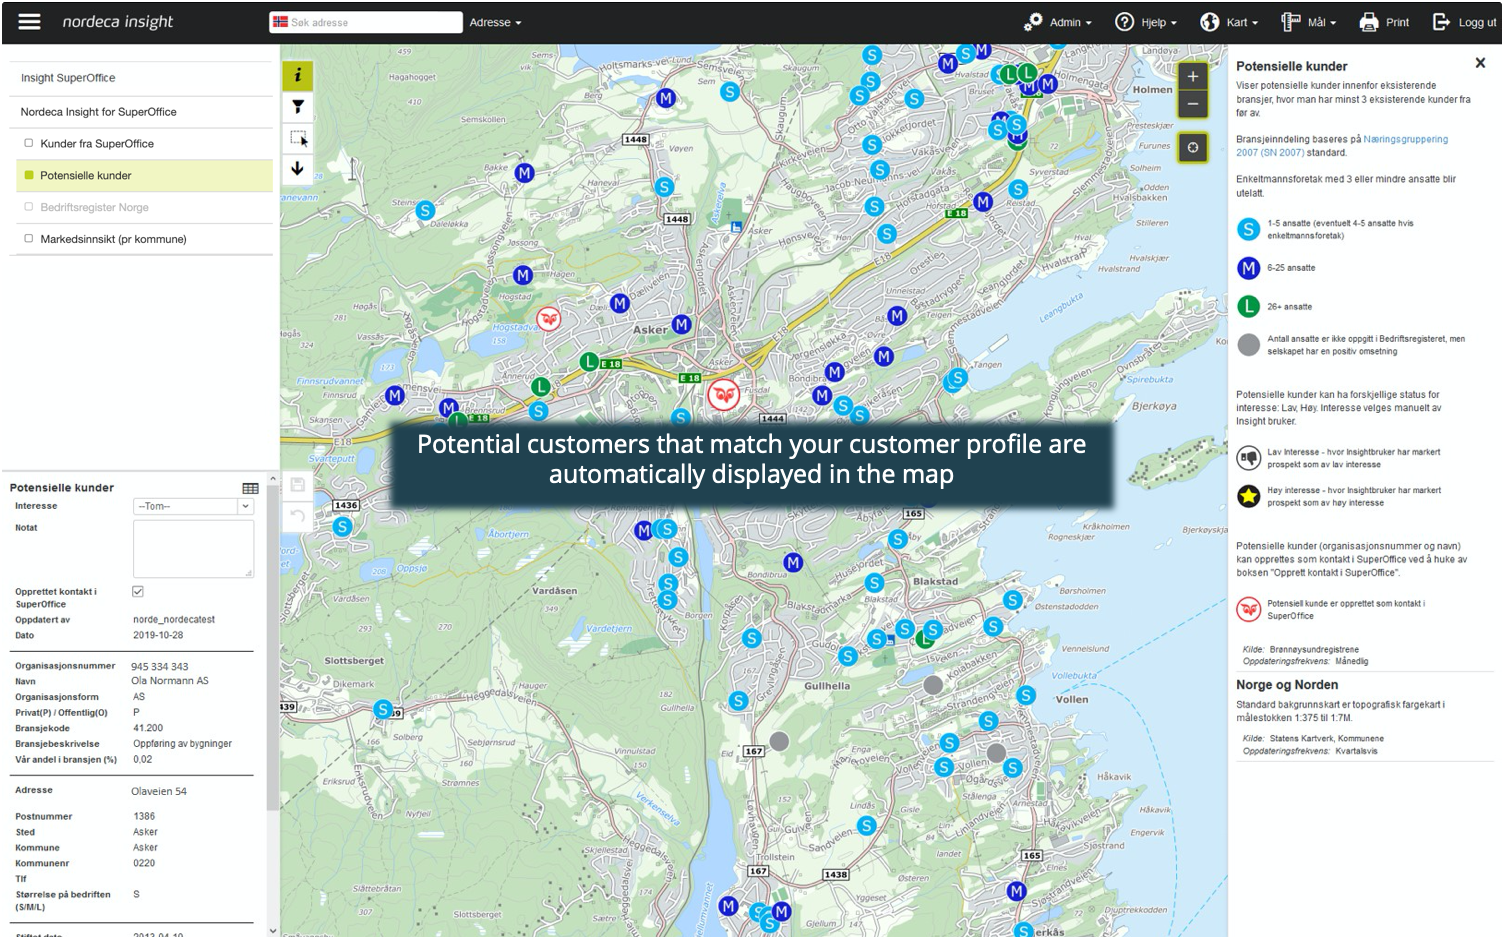 Nordeca insight map displays potential customers matching a customer profile